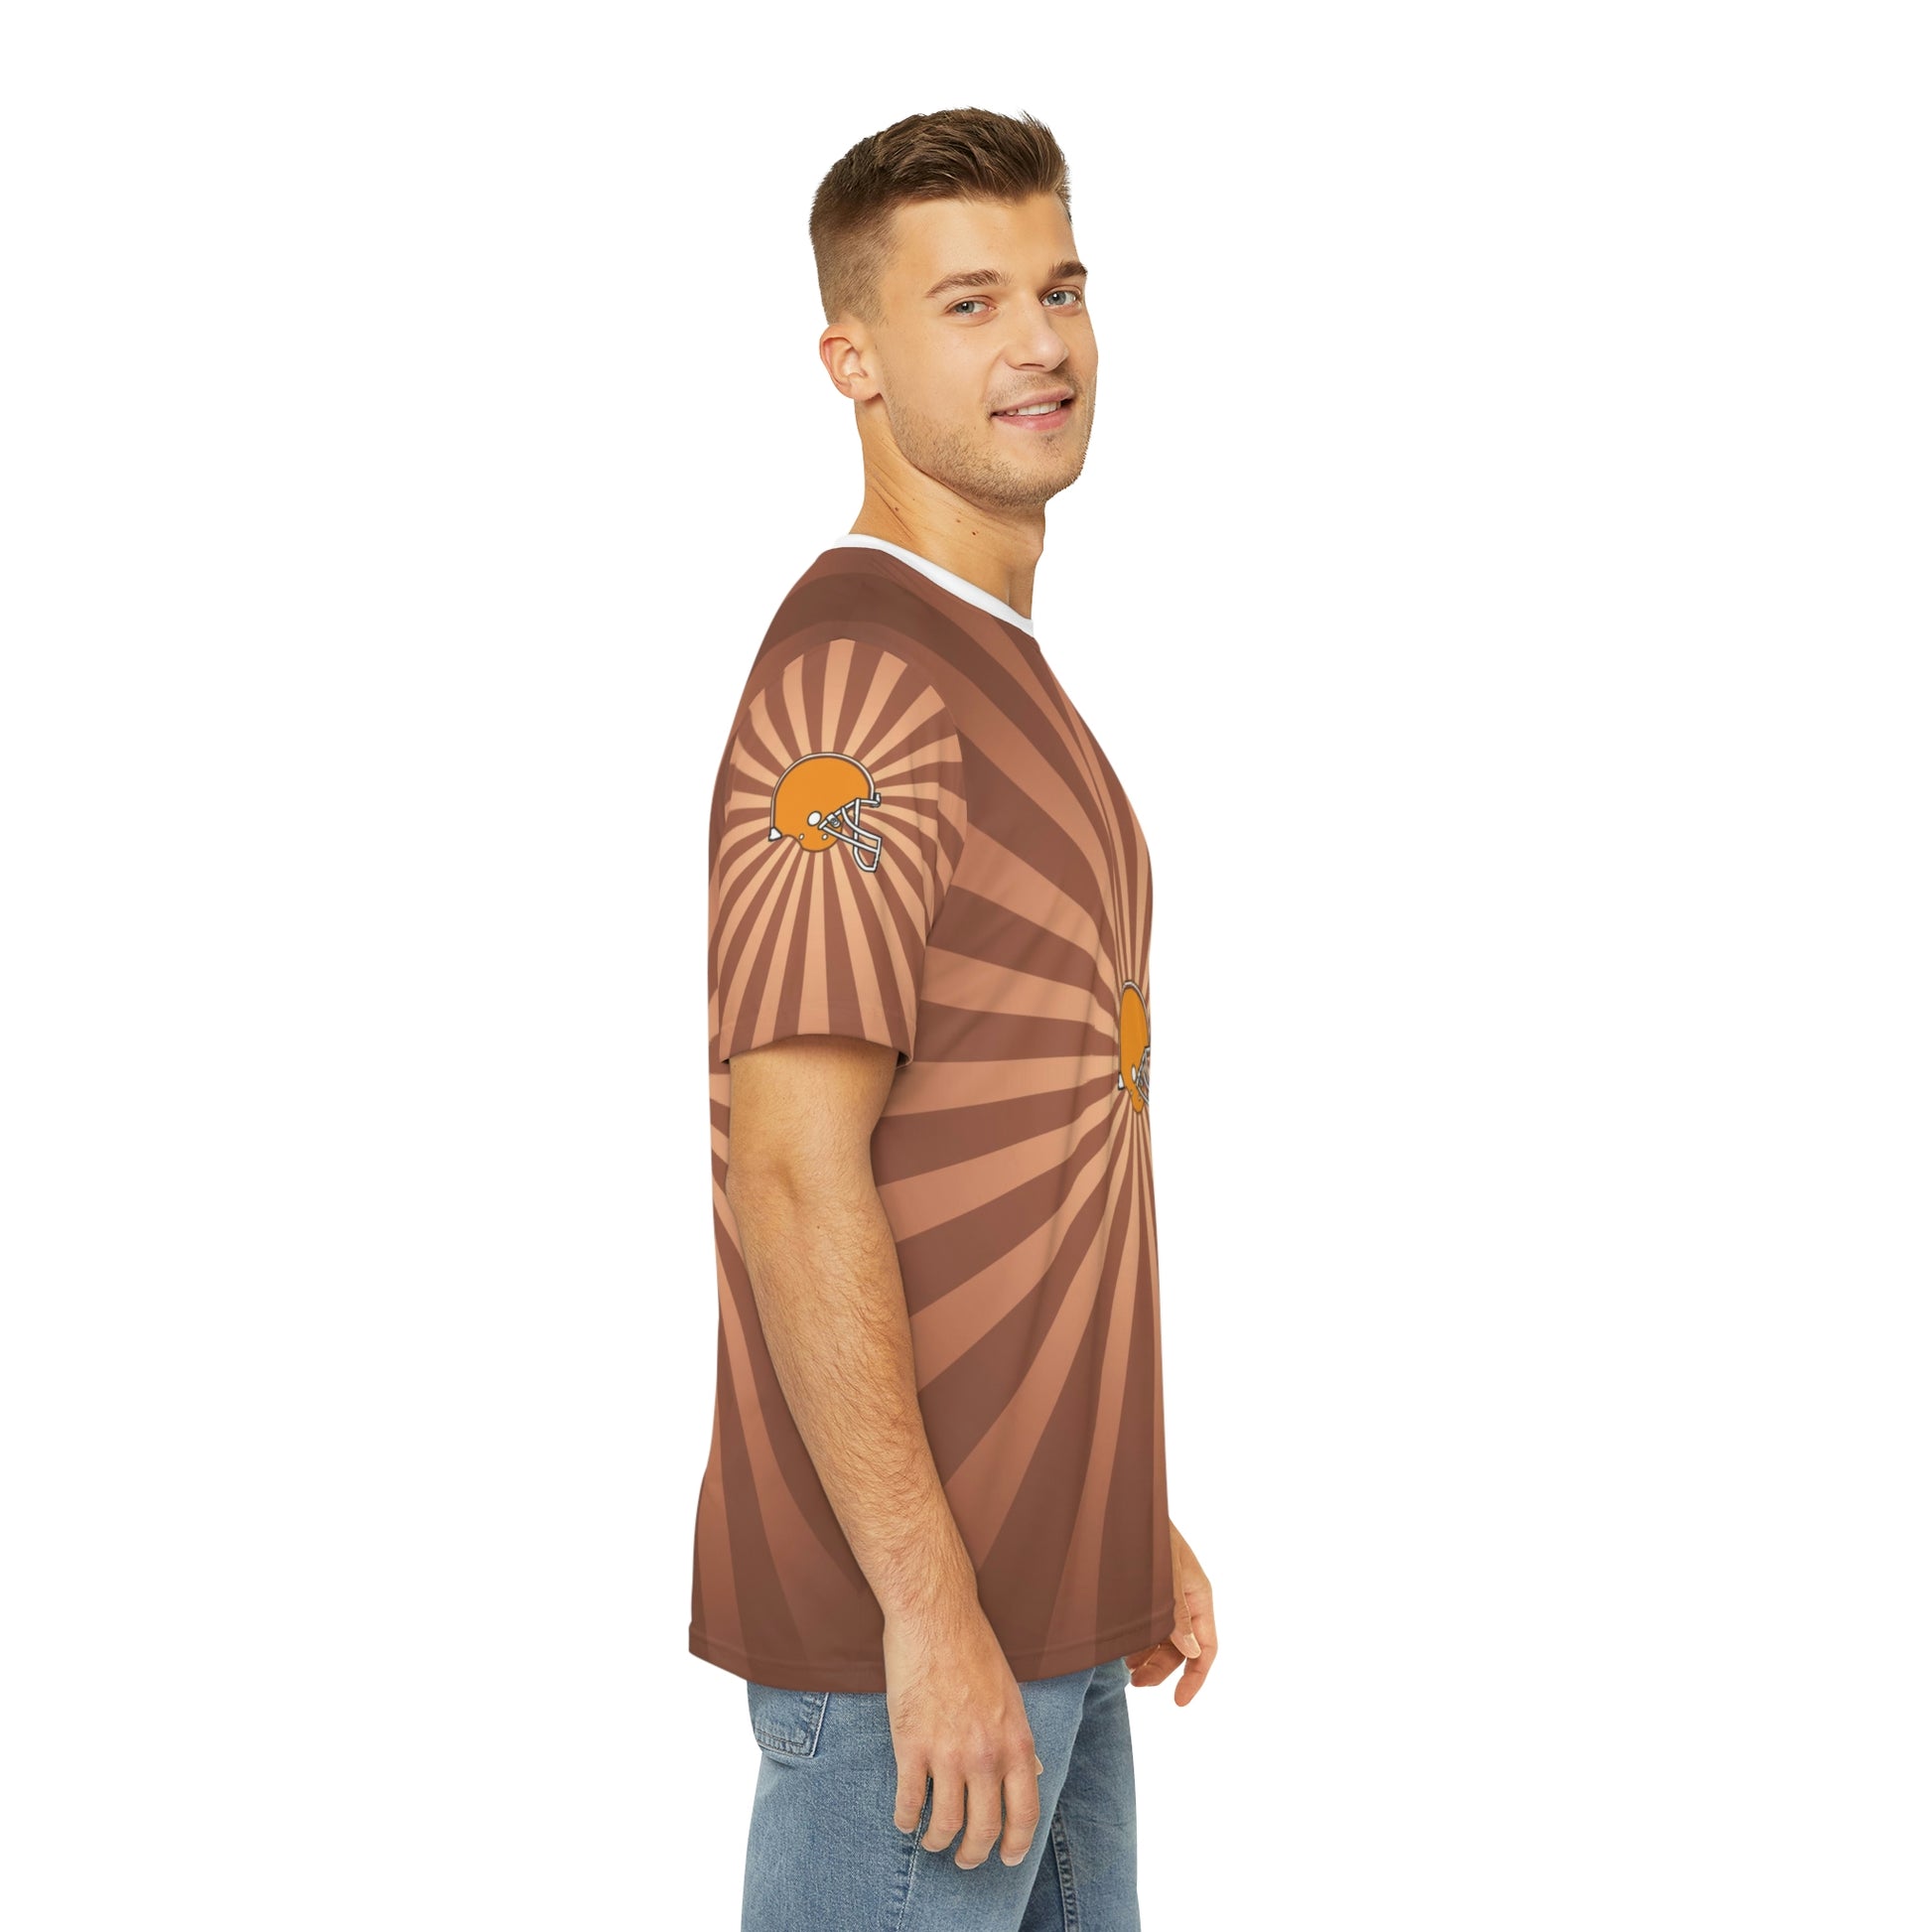 Geotrott NFL Cleveland Browns Men's Polyester All Over Print Tee T-Shirt-All Over Prints-Geotrott